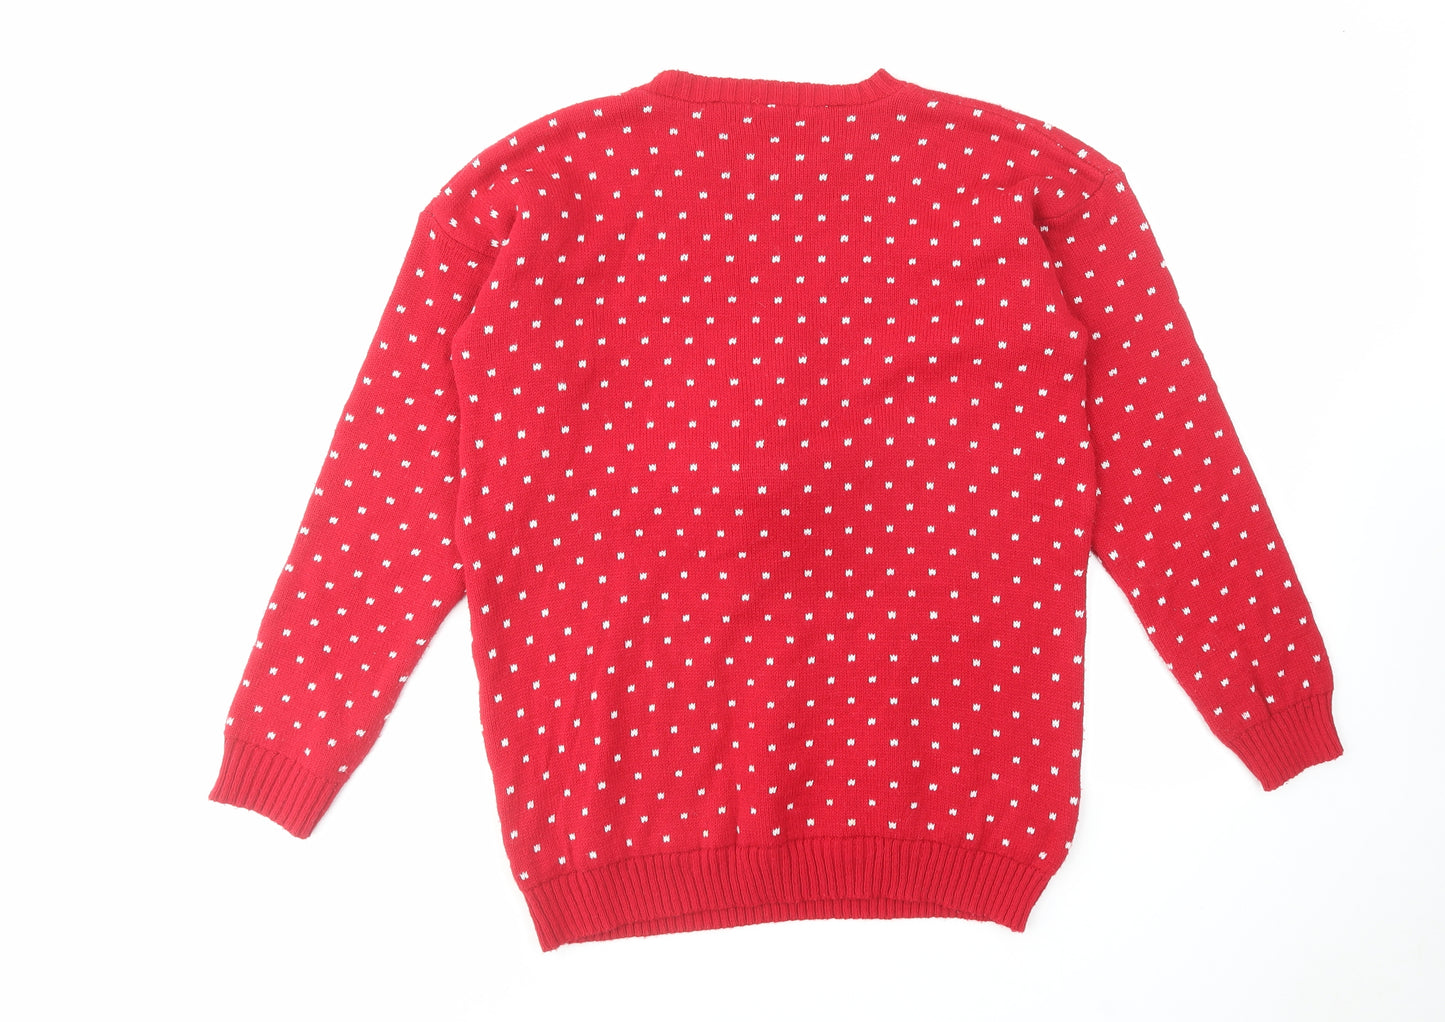 Blush Womens Red Round Neck Polka Dot Acrylic Pullover Jumper Size M - Reindeer Christmas